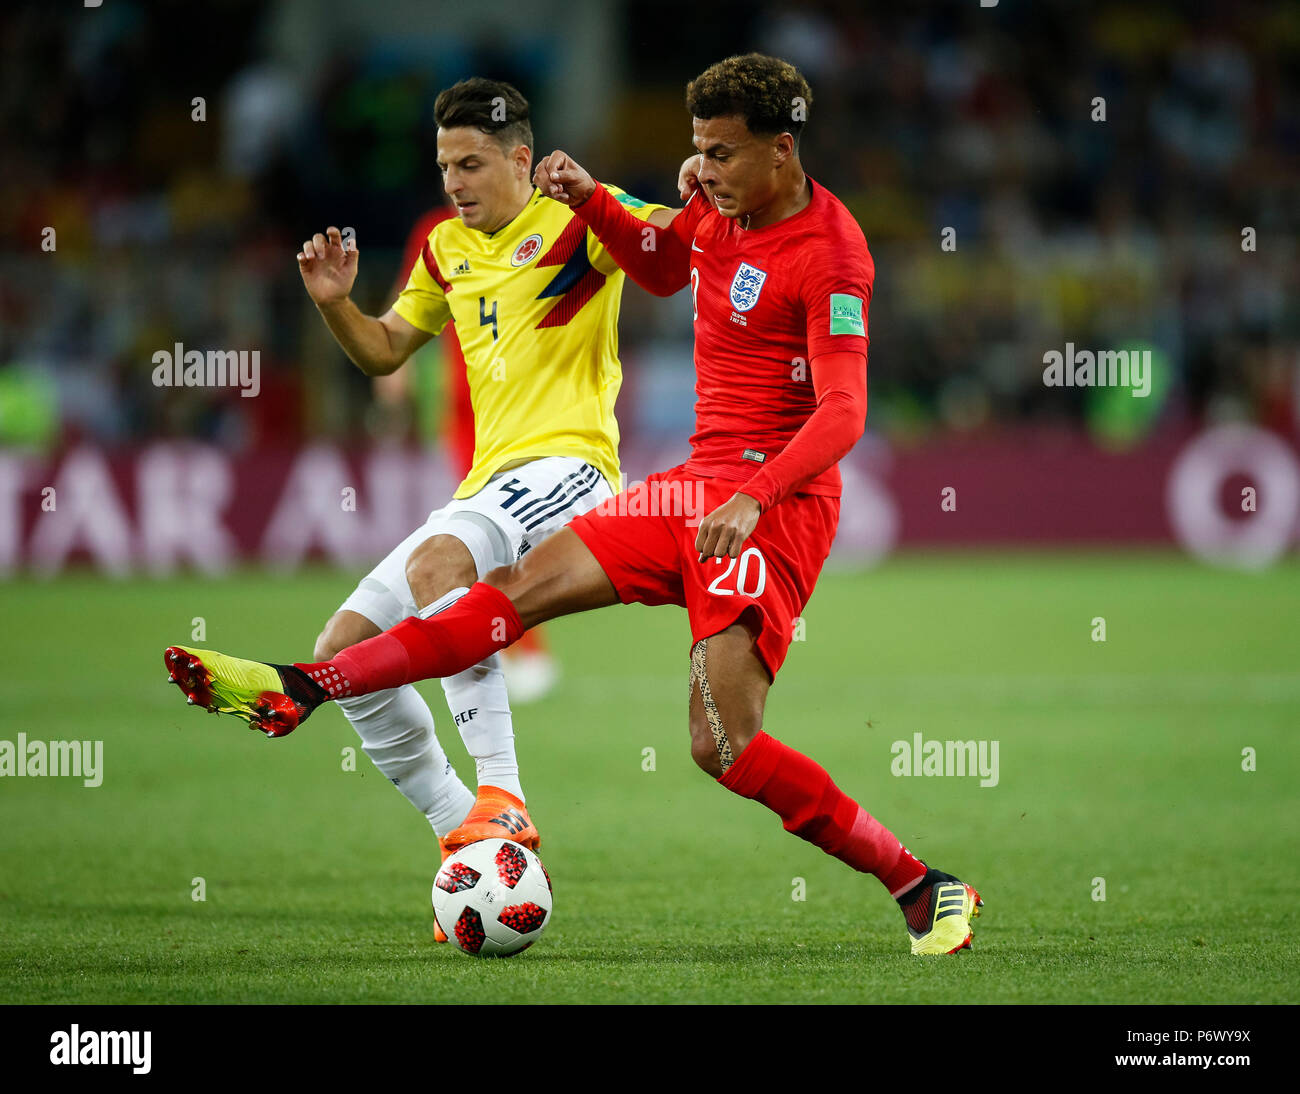 Moscow, Russia. 3rd July, 2018. Dele Alli of England and Santiago Arias of Colombia during the 2018 FIFA World Cup Round of 16 match between Colombia and England at Spartak Stadium on July 3rd 2018 in Moscow, Russia. Credit: PHC Images/Alamy Live News Stock Photo